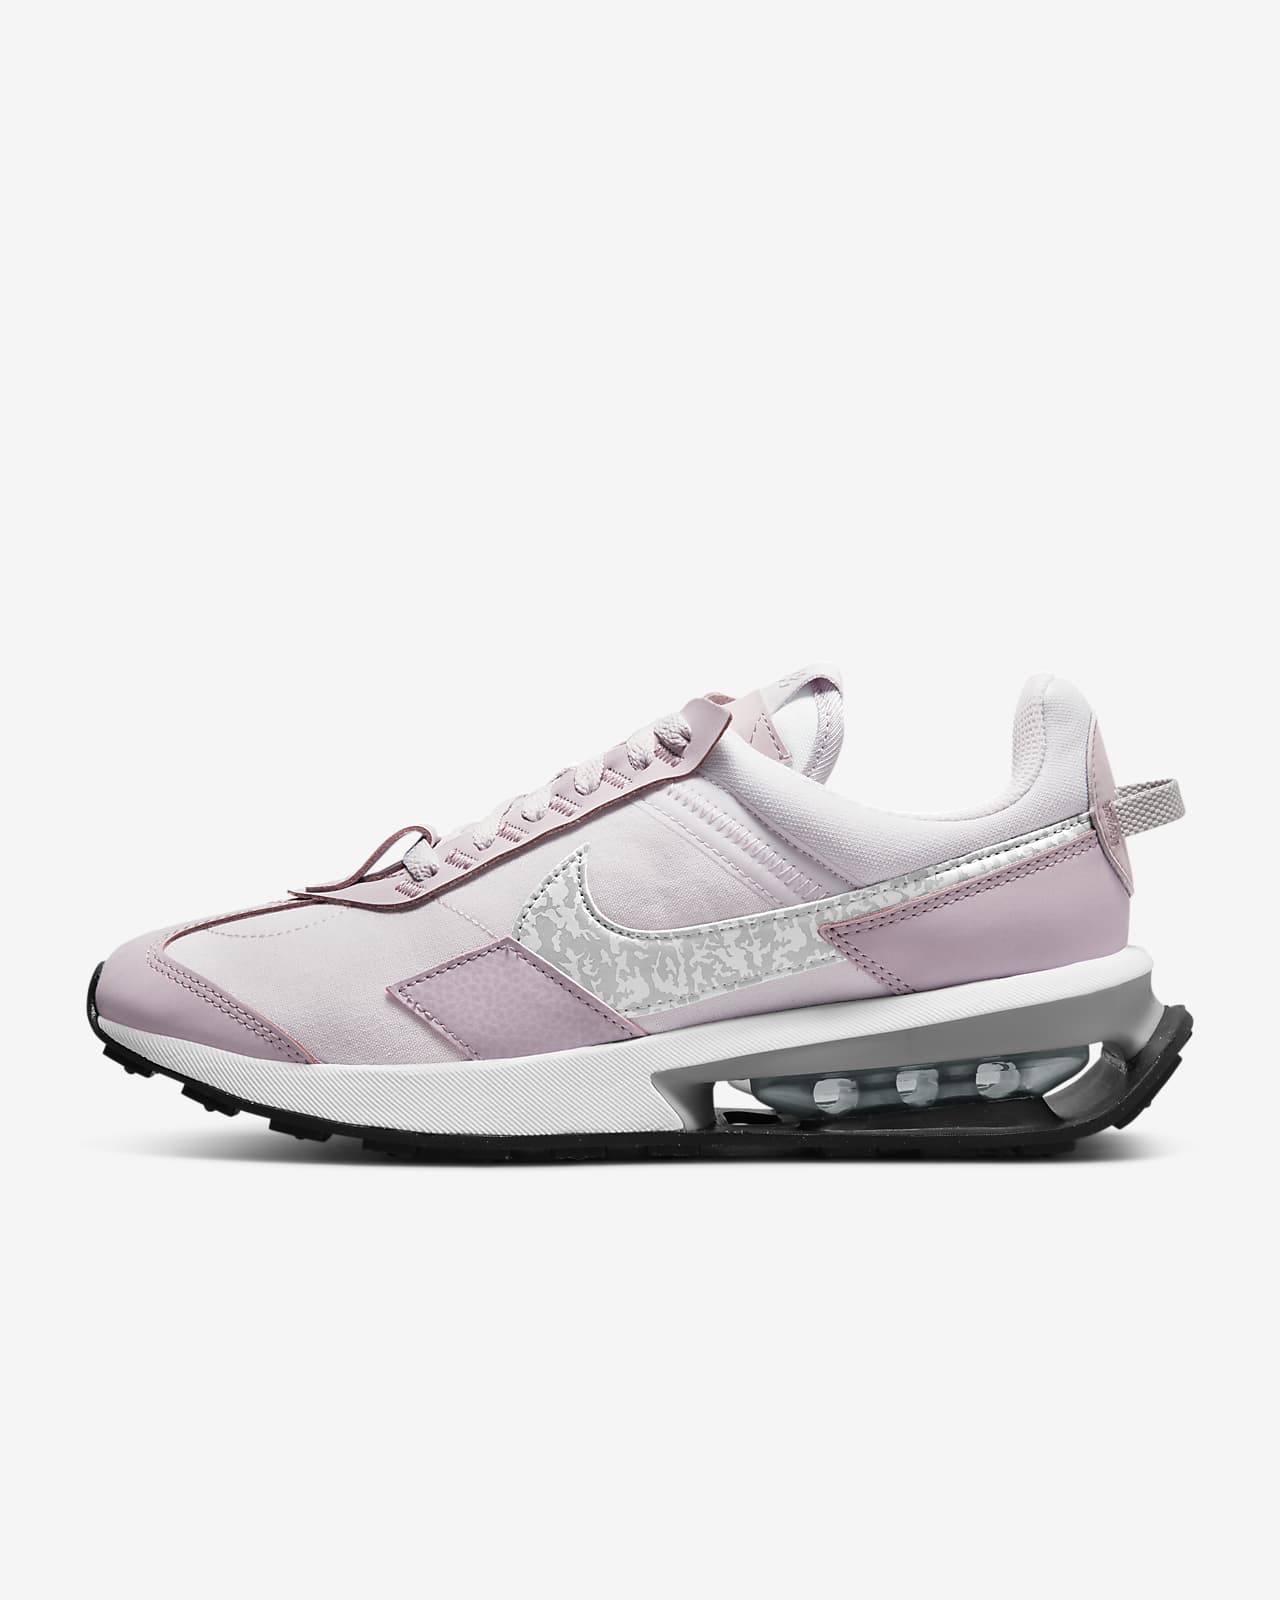 Nike Air Max pink and white nike air max Pre-Day Women's Shoes. Nike.com